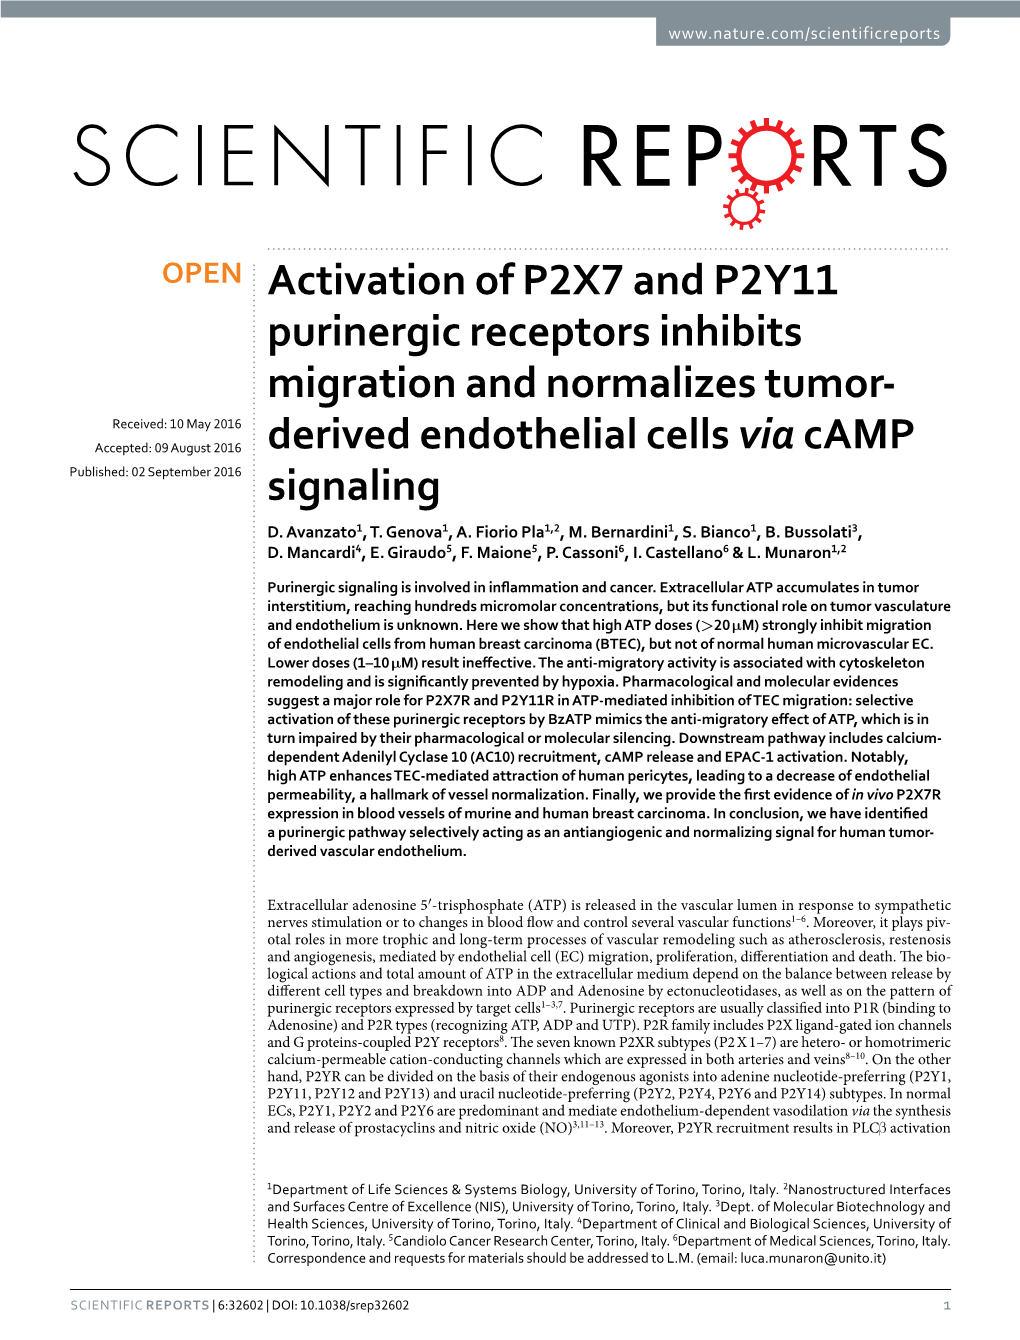 Activation of P2X7 and P2Y11 Purinergic Receptors Inhibits